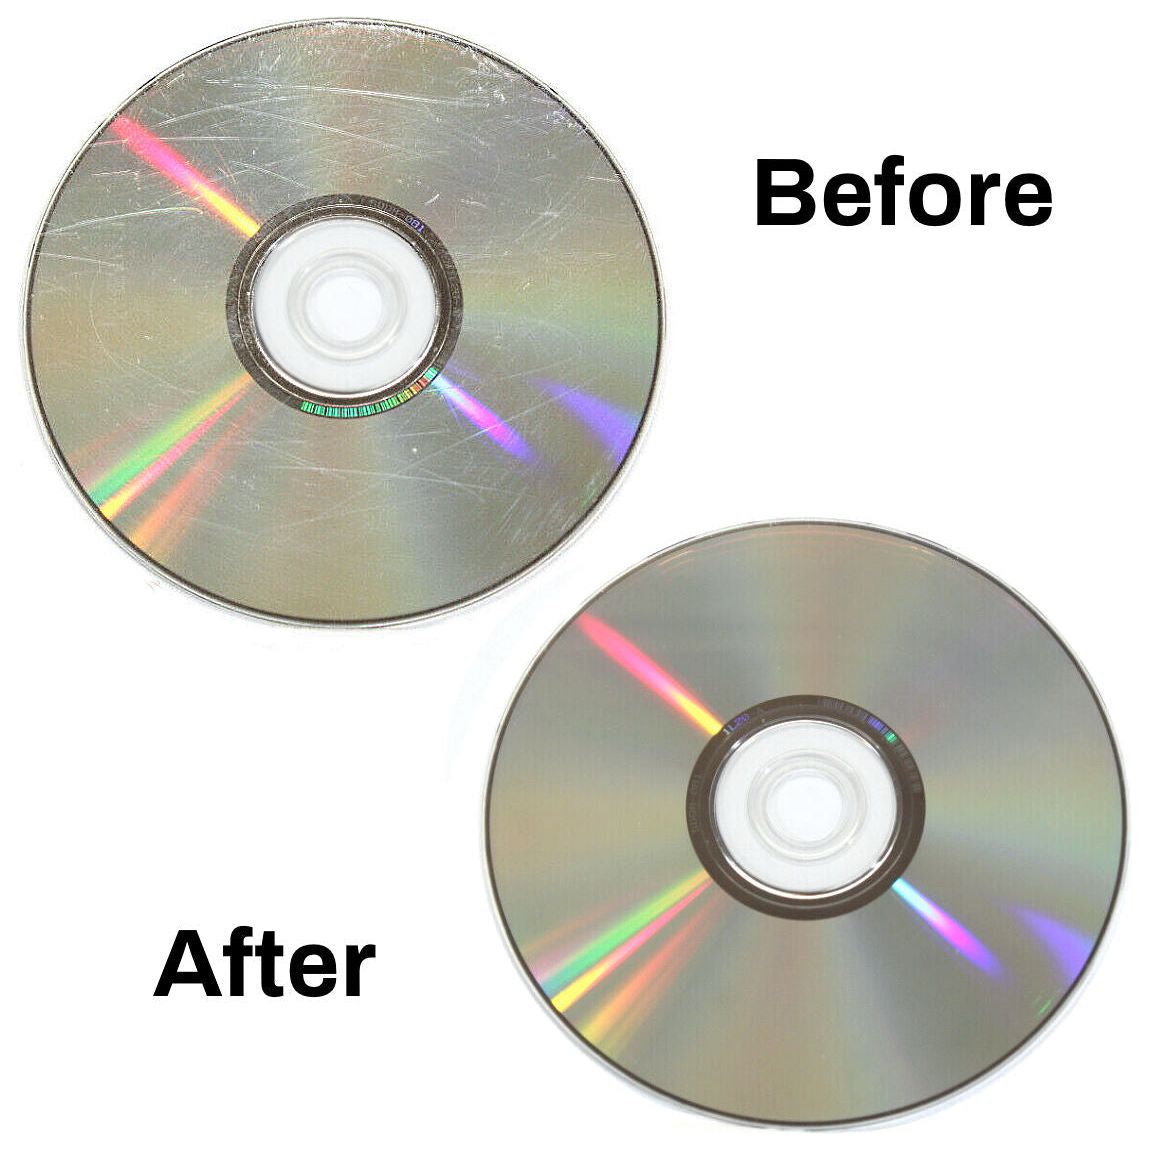 Disc Protector 2 - CD/DVD Repair Kit - CD / DVD Scratch Repair & Cleaner  Electric Machine - Works On PS3 Xbox Wii Discs Home Entertainment -  Cheapest prices!